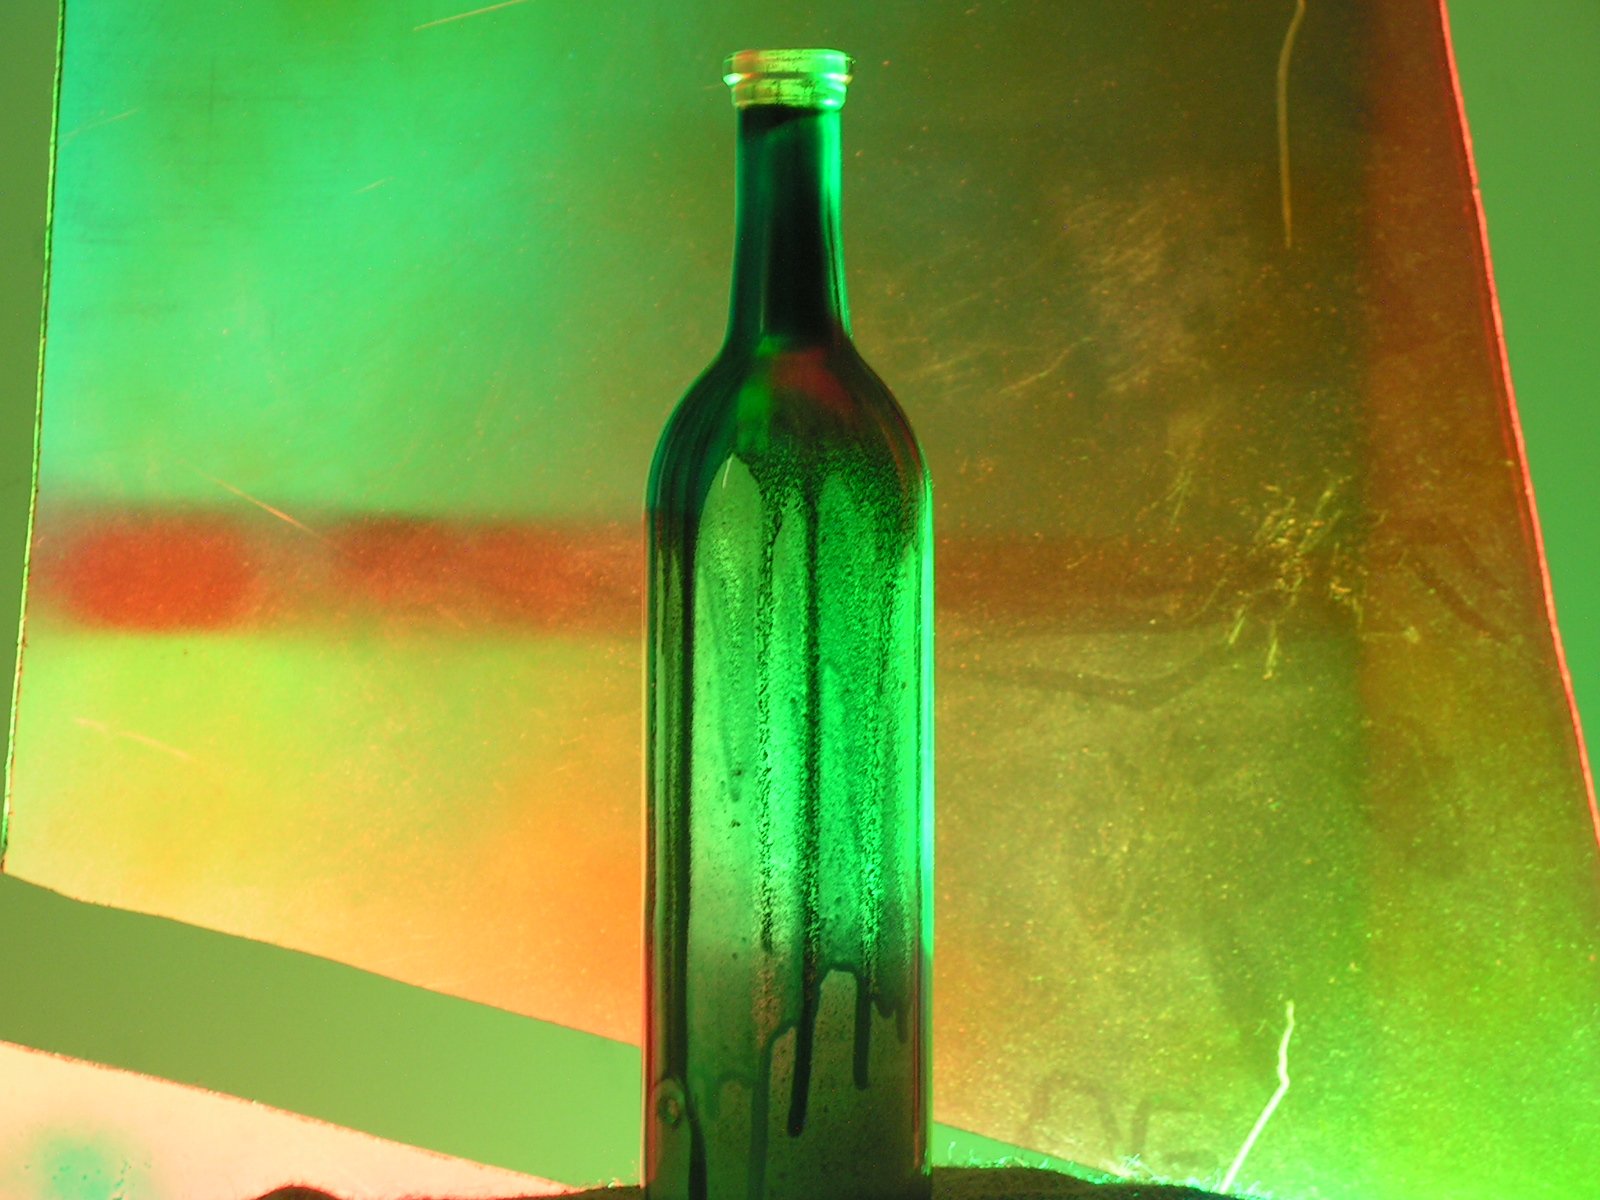 the bottle is glowing green while sitting on a table